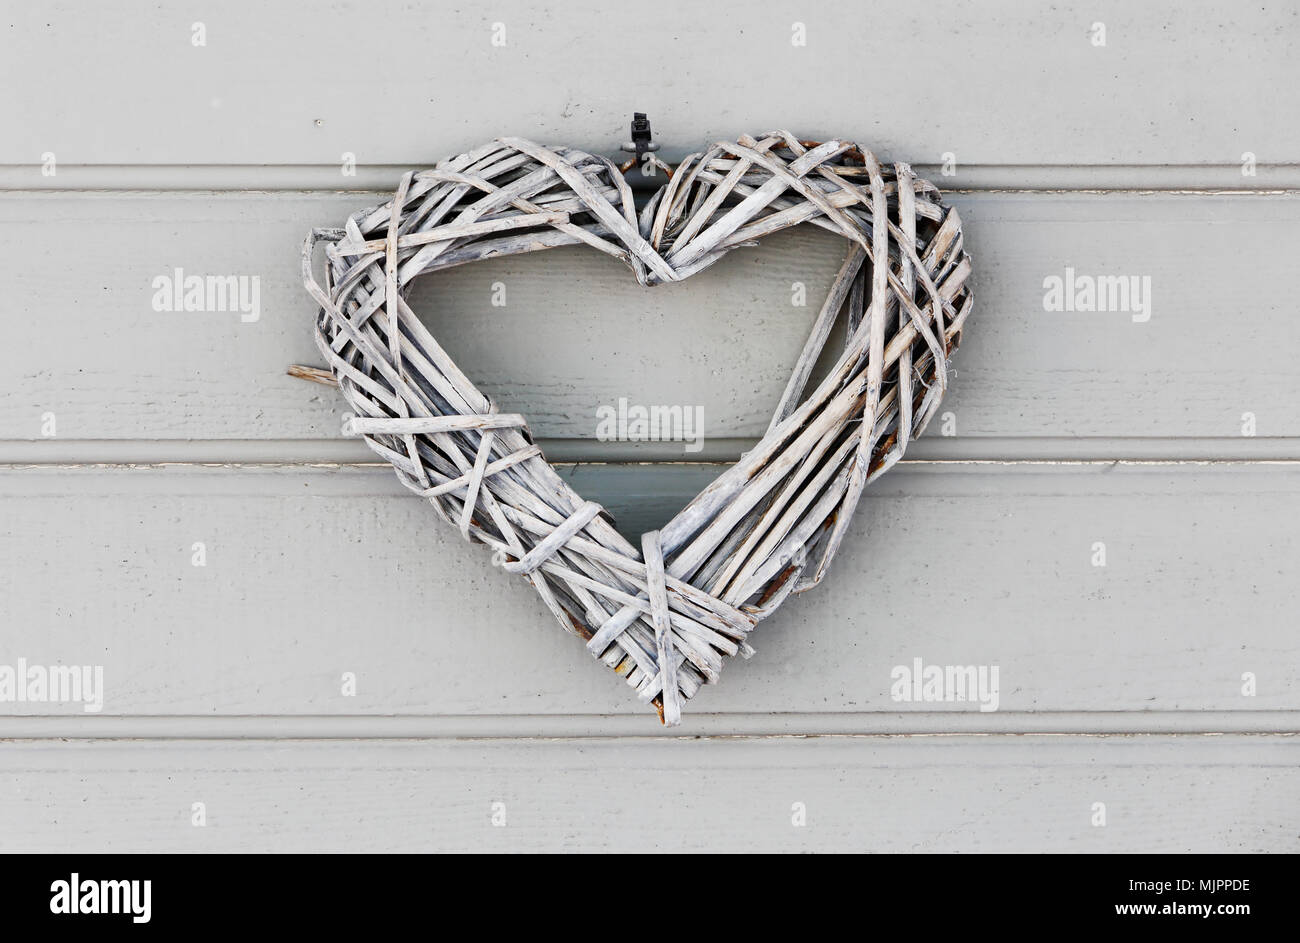 Closeup of a grey heart shaped ornament on a grey wooden door. Stock Photo